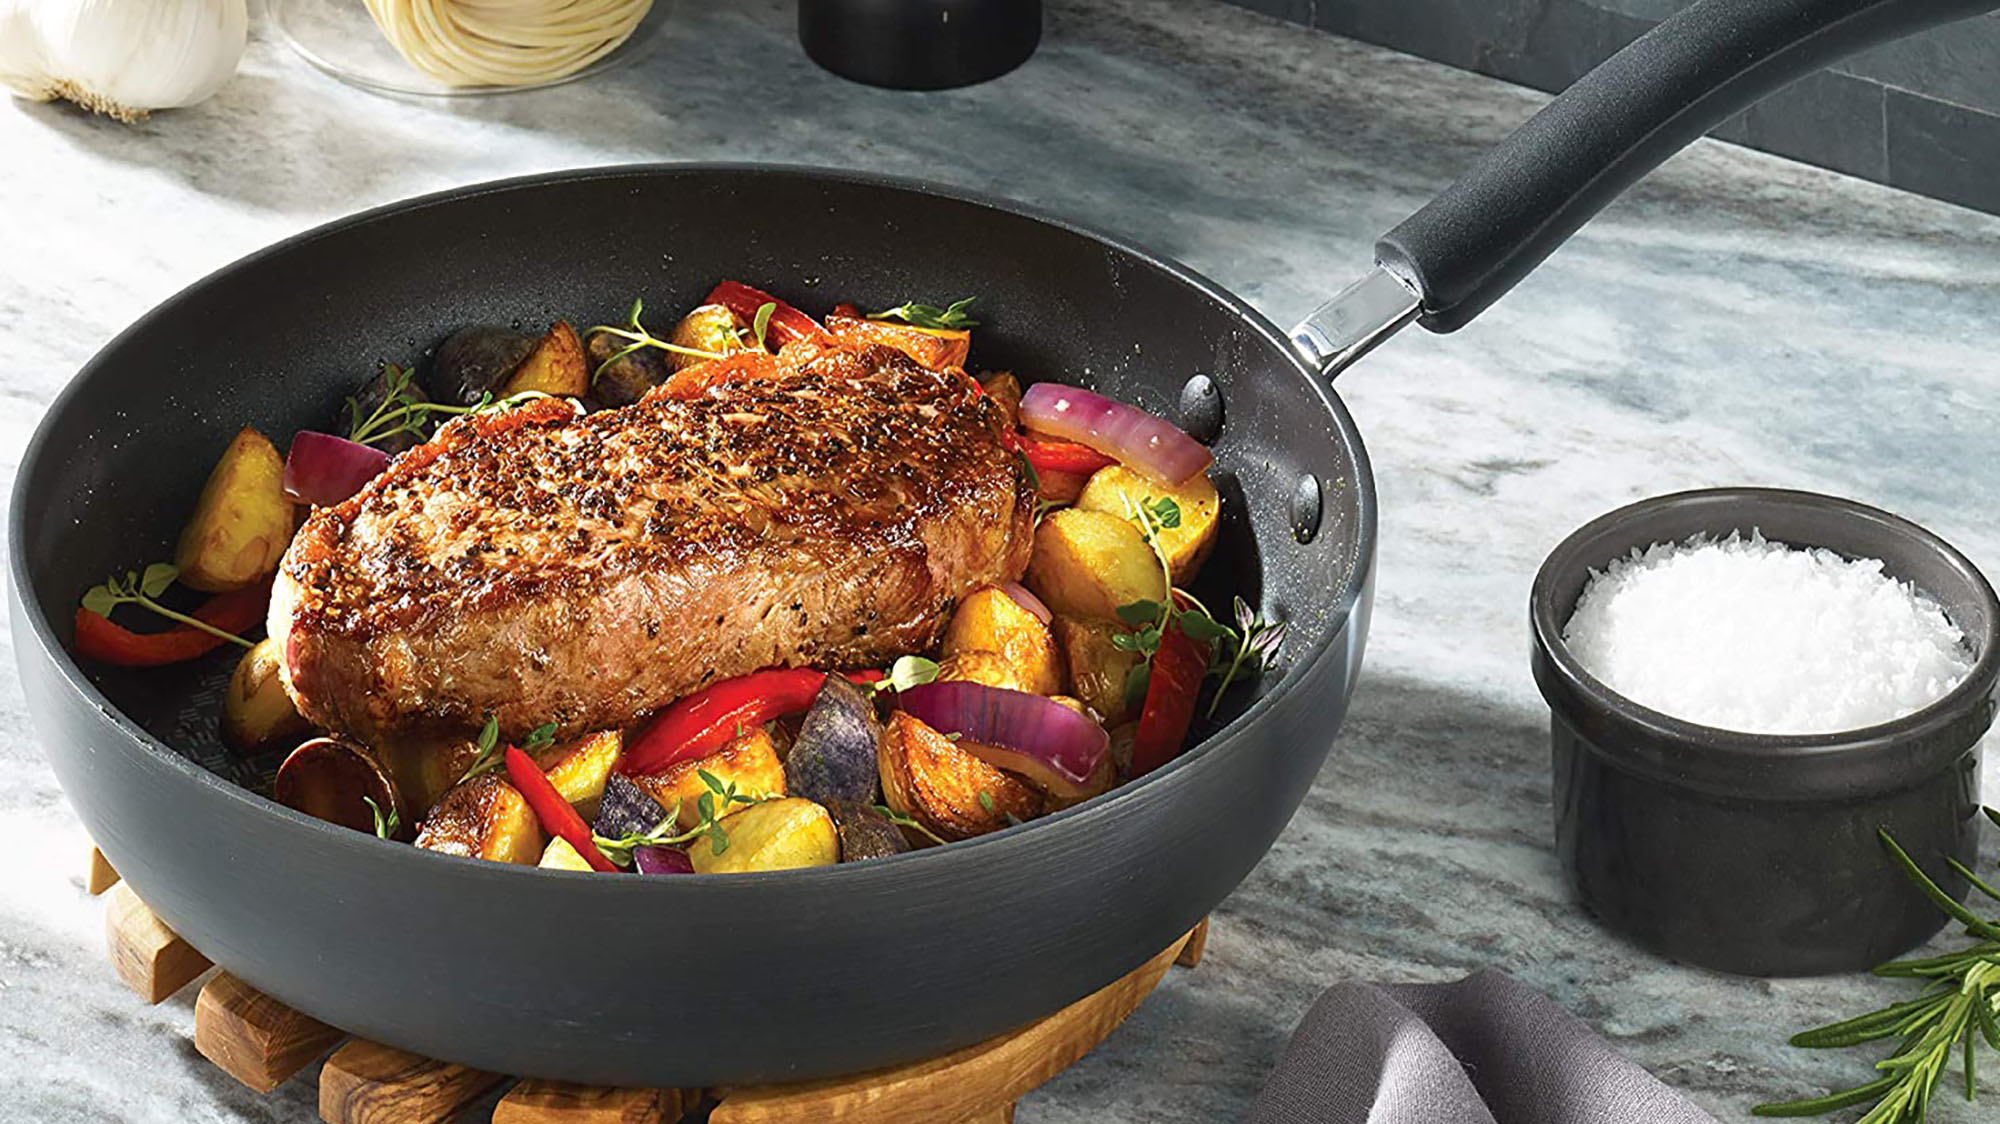 Smart Home 12-inch Non-Stick Fry Pan in Black 